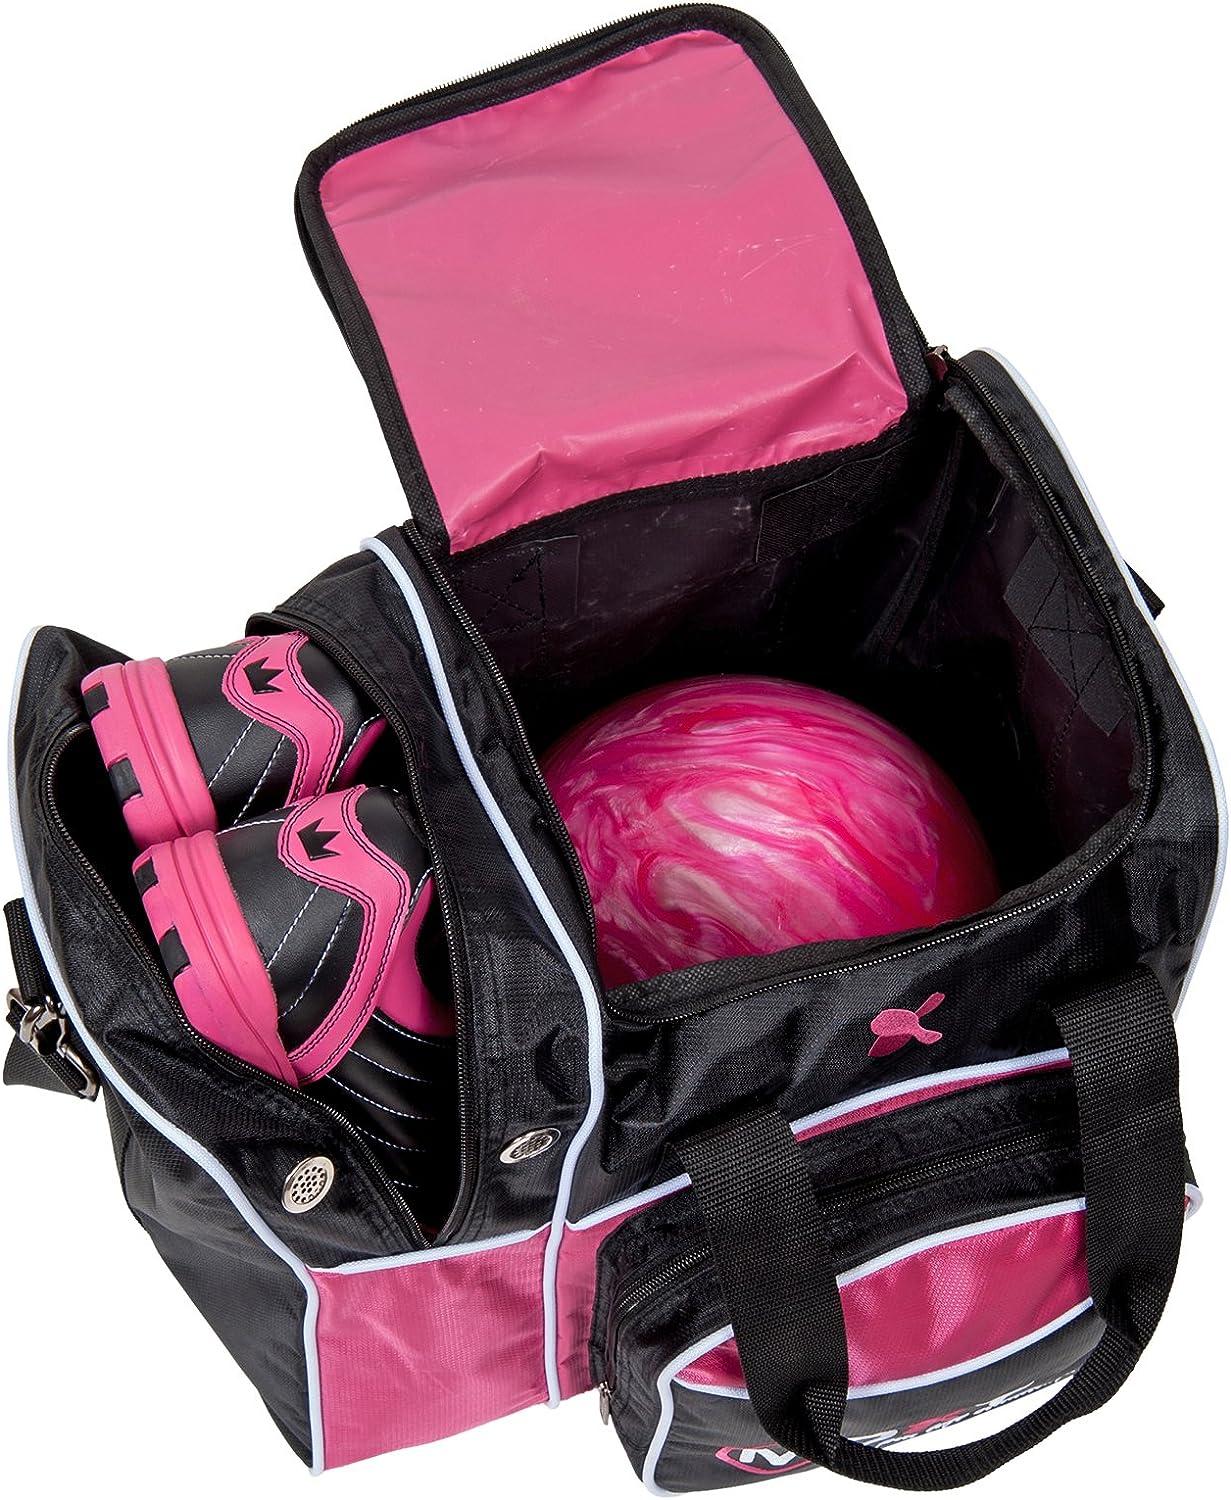 Moxy Deluxe Single Tote Bowling Bag- Many Colors to choose from